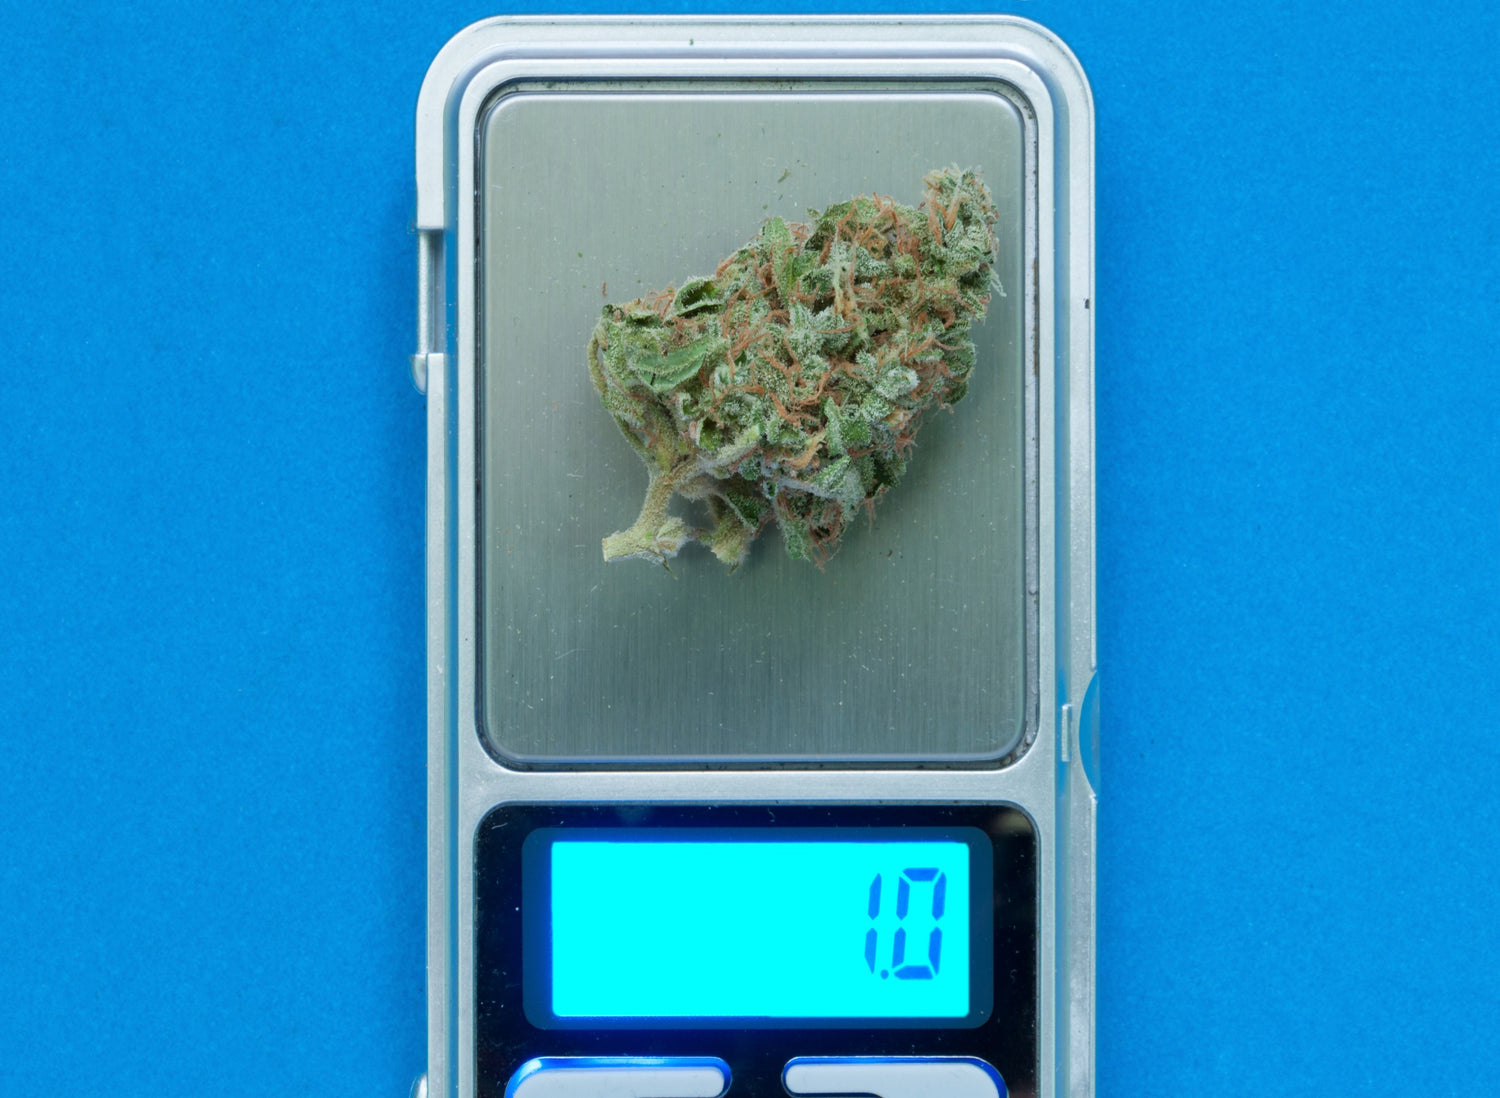 How Much is an Ounce of Weed?